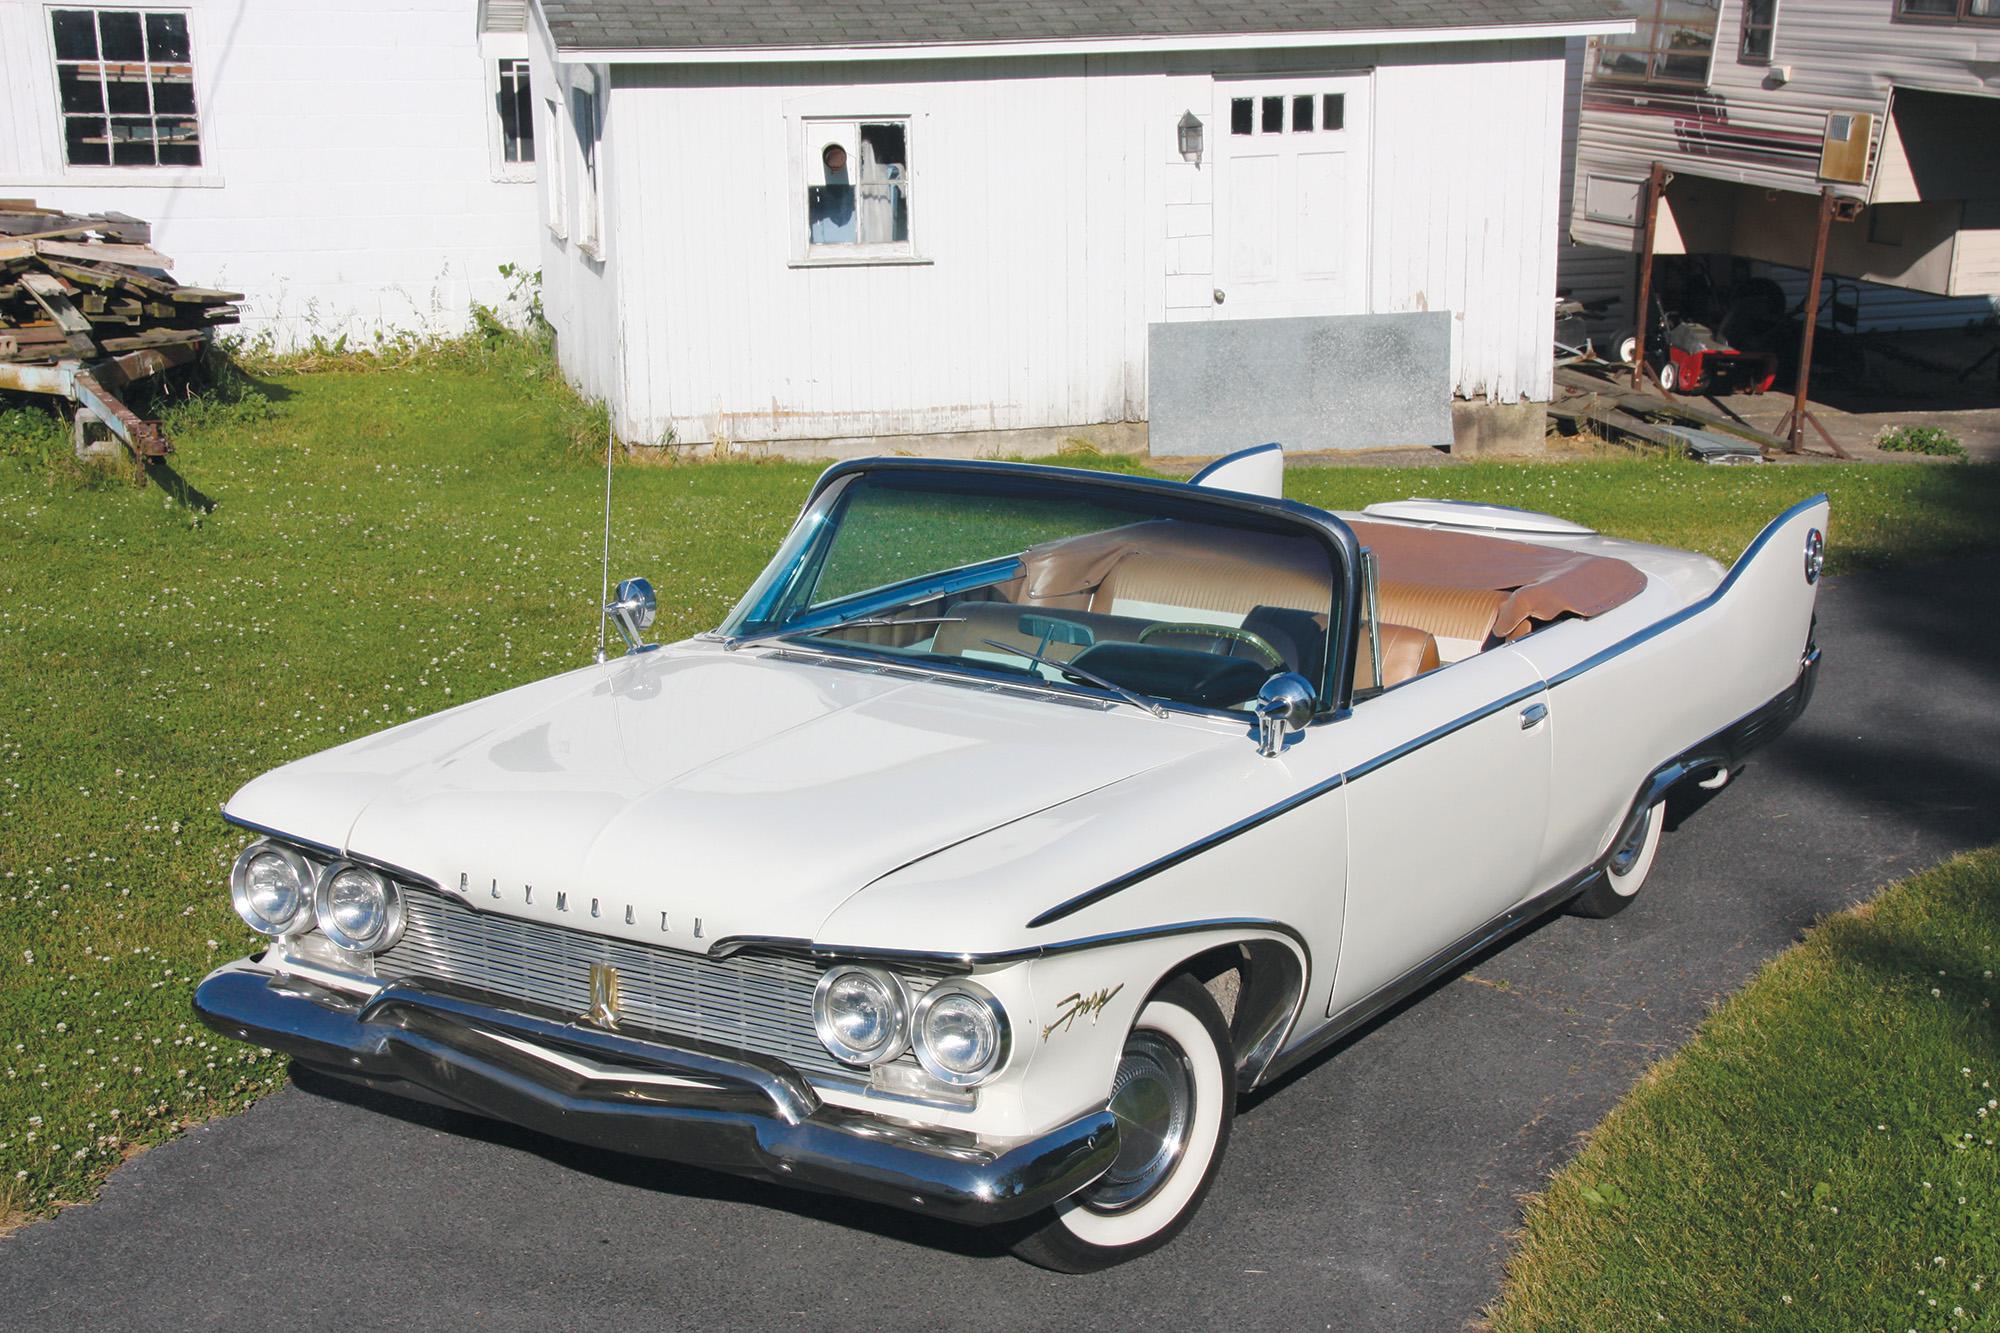 Credit the Lawrence Welk Show for the purchase of this 1960 Plymouth Fury